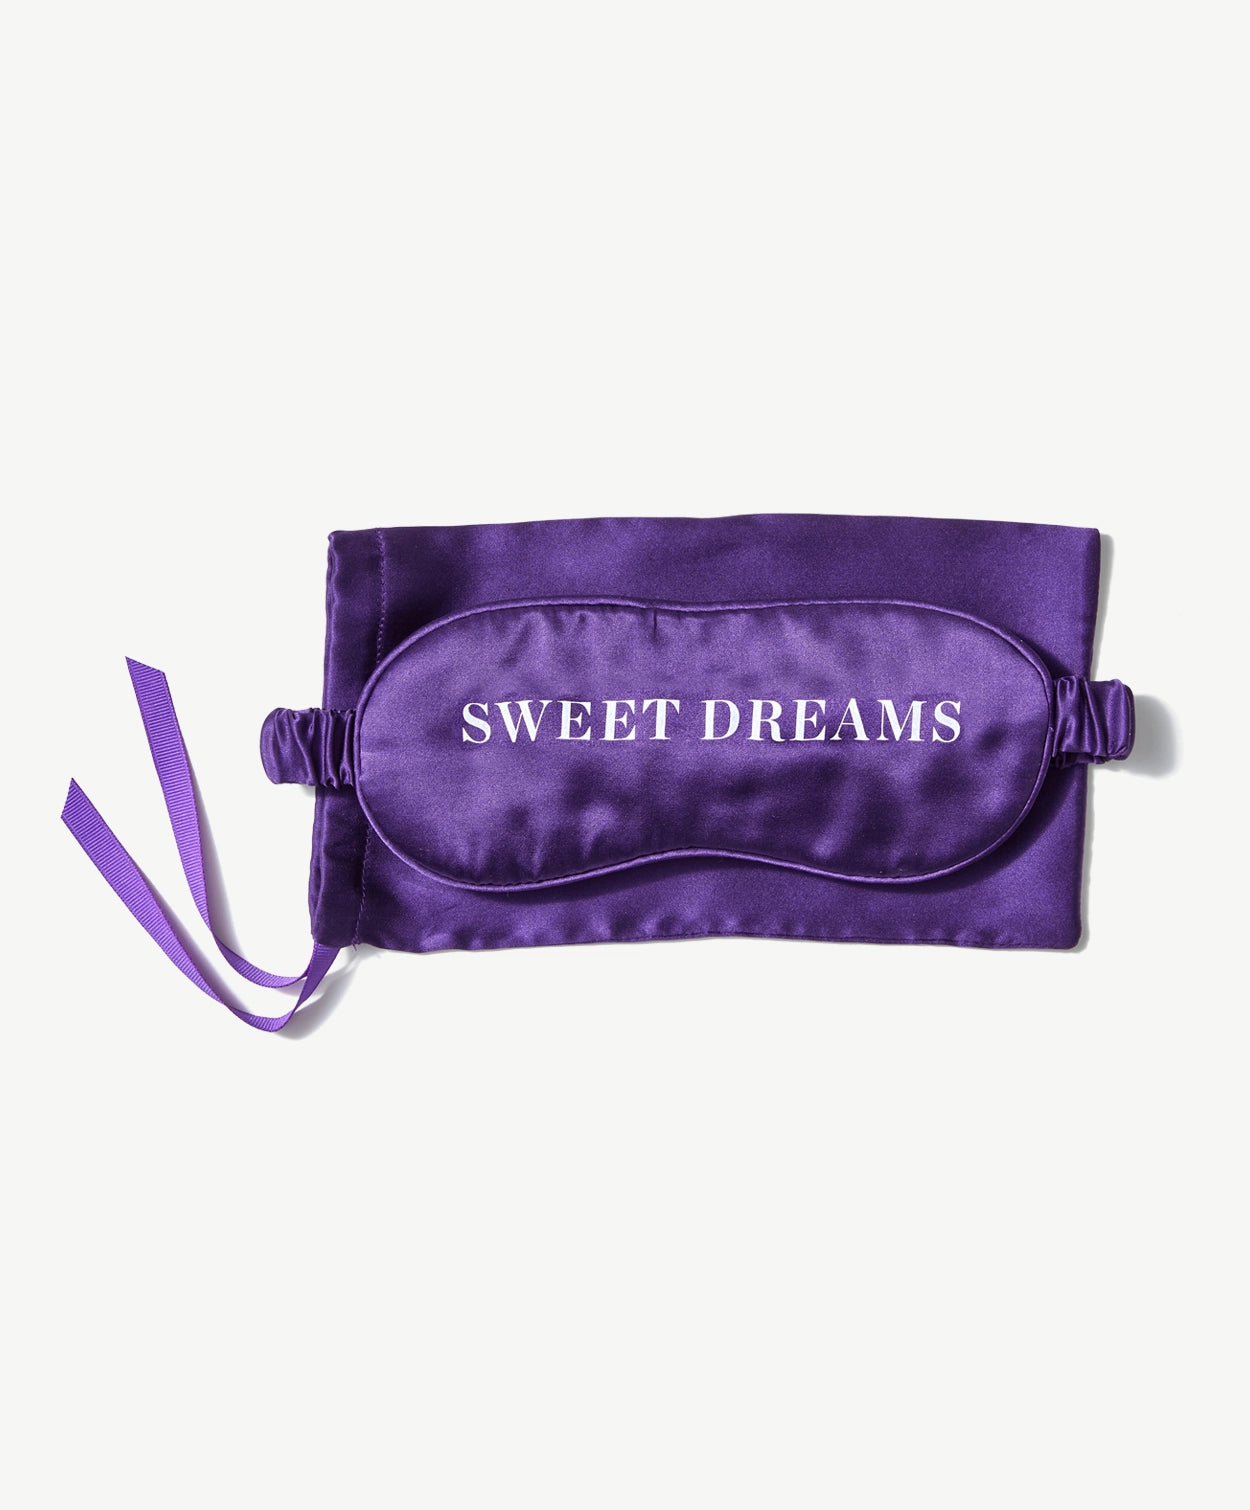 Vosges Haut Chocolat purple silk sleep mask on top a matching storage bag with a purple ribbon on a light grey background.